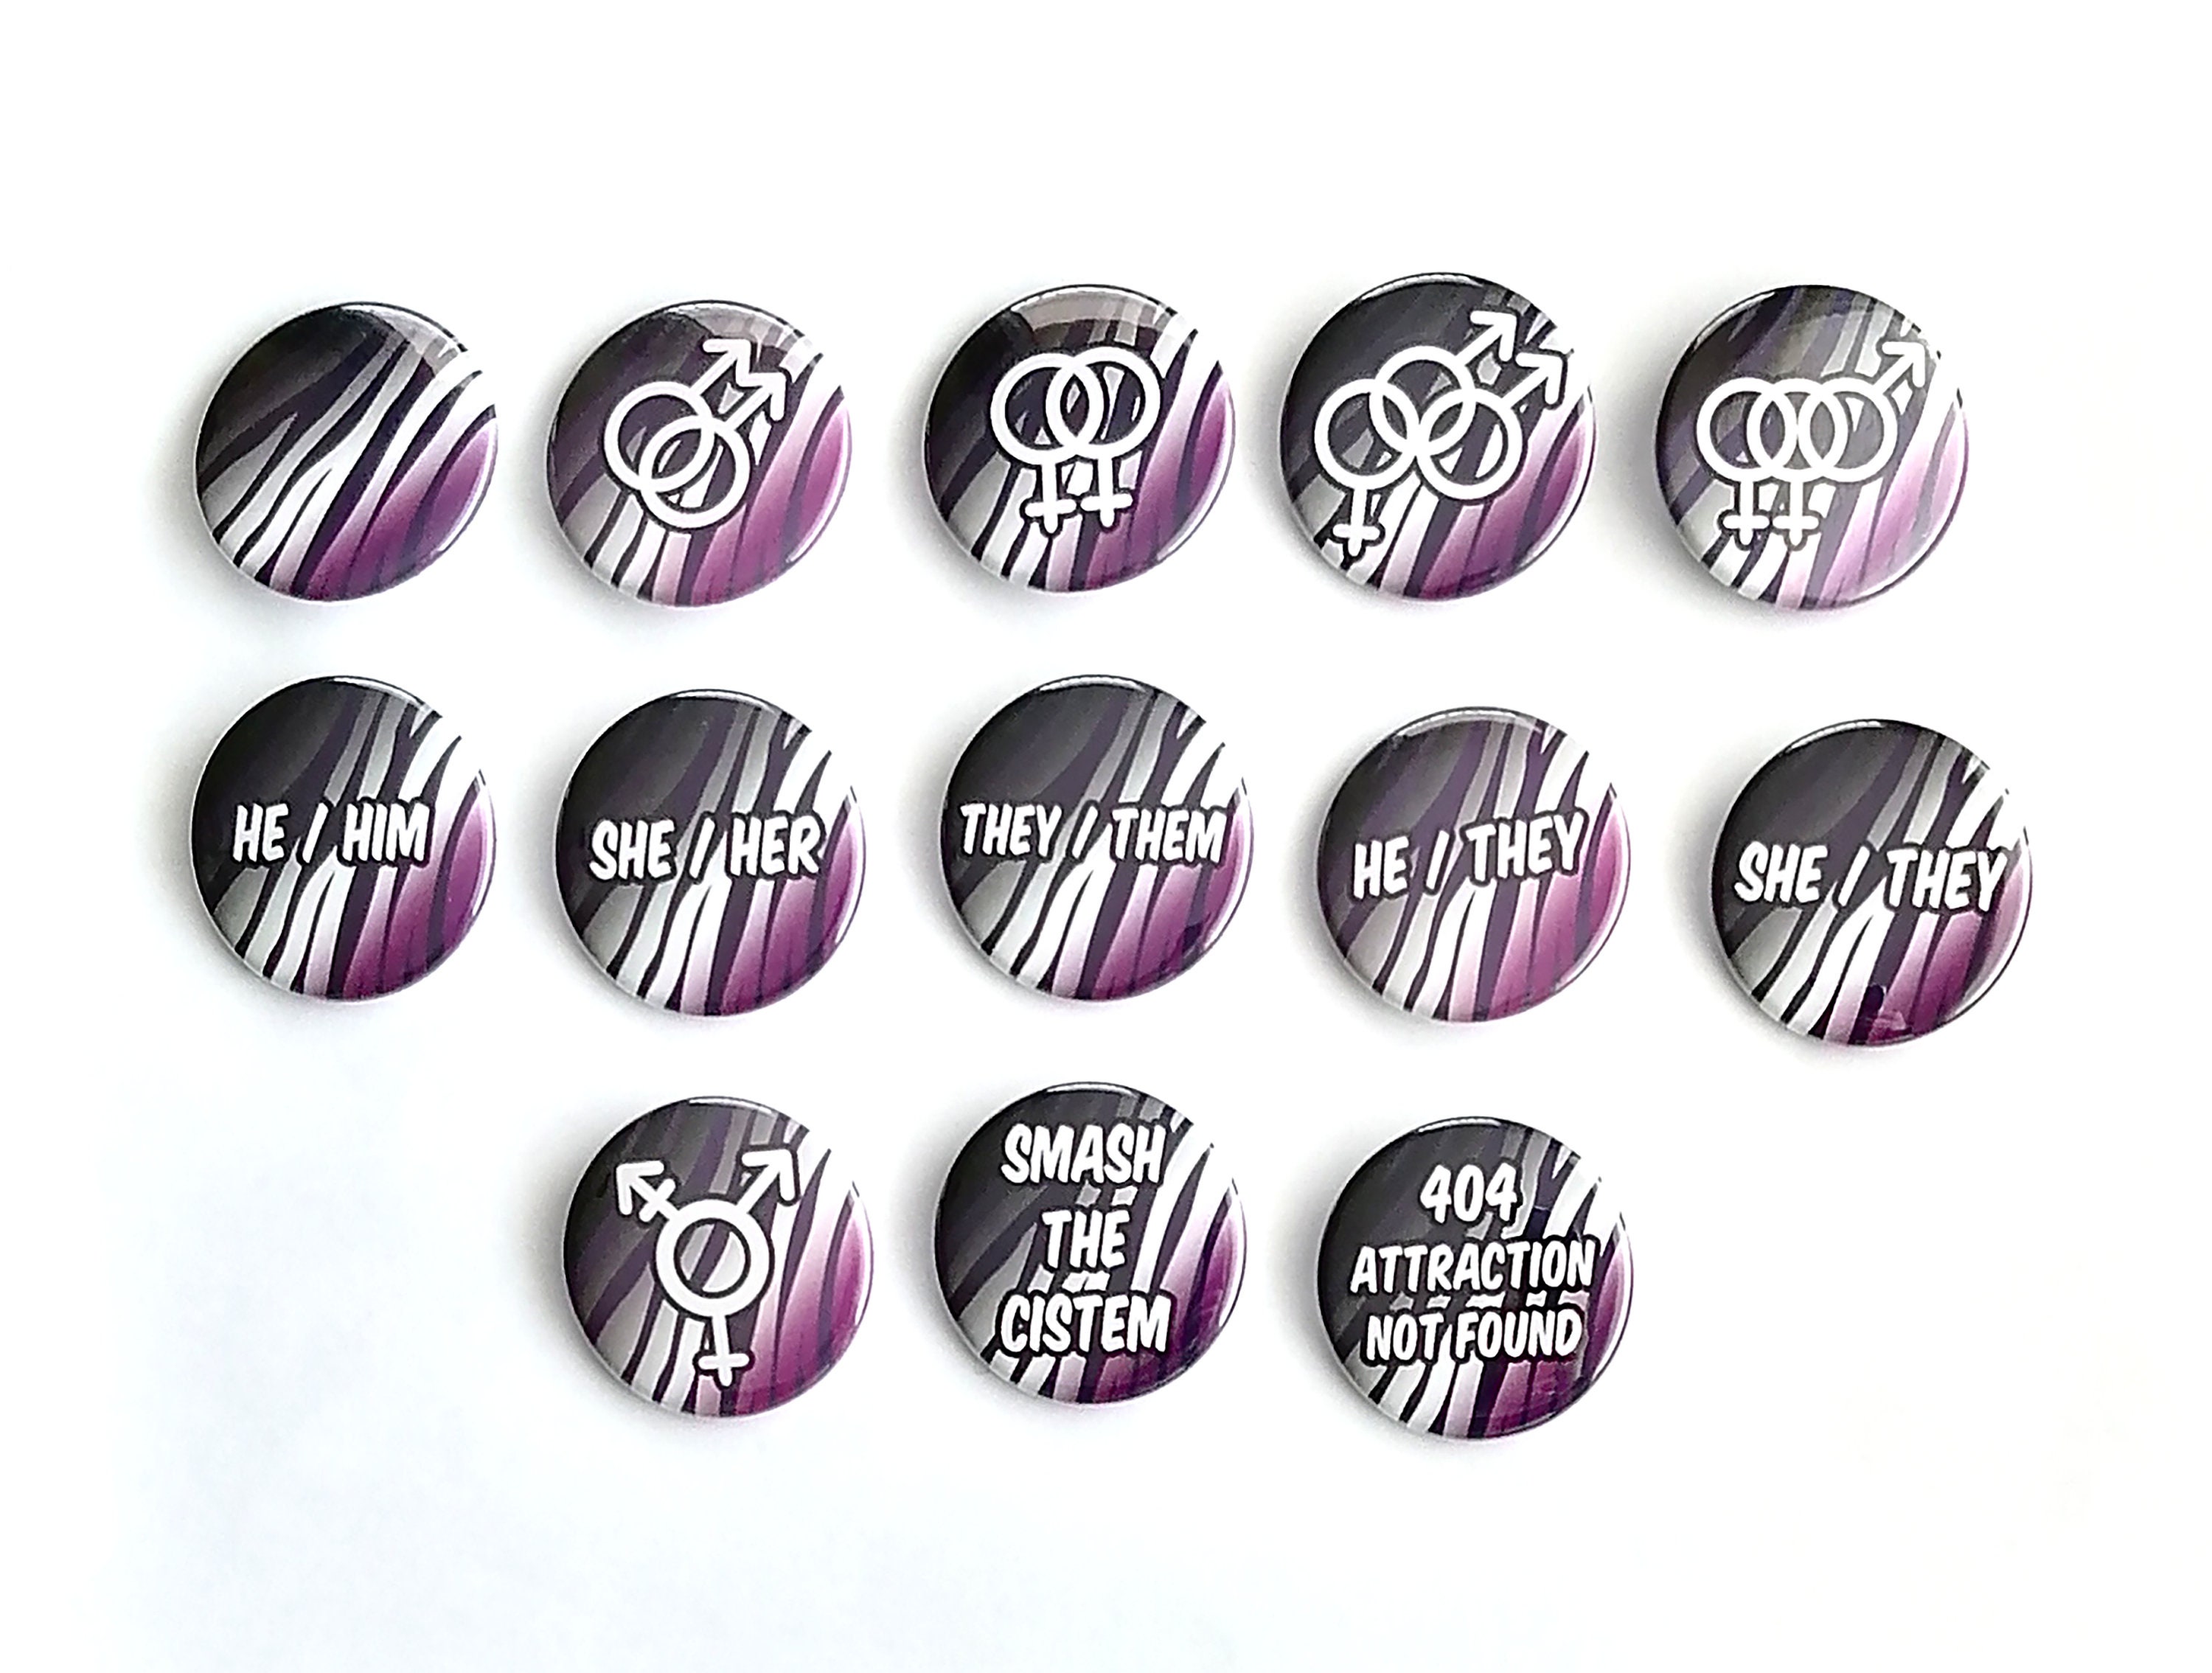 Asexual Ace Pride Flag Pin Buttons / Tiger Stripes / Pronouns 